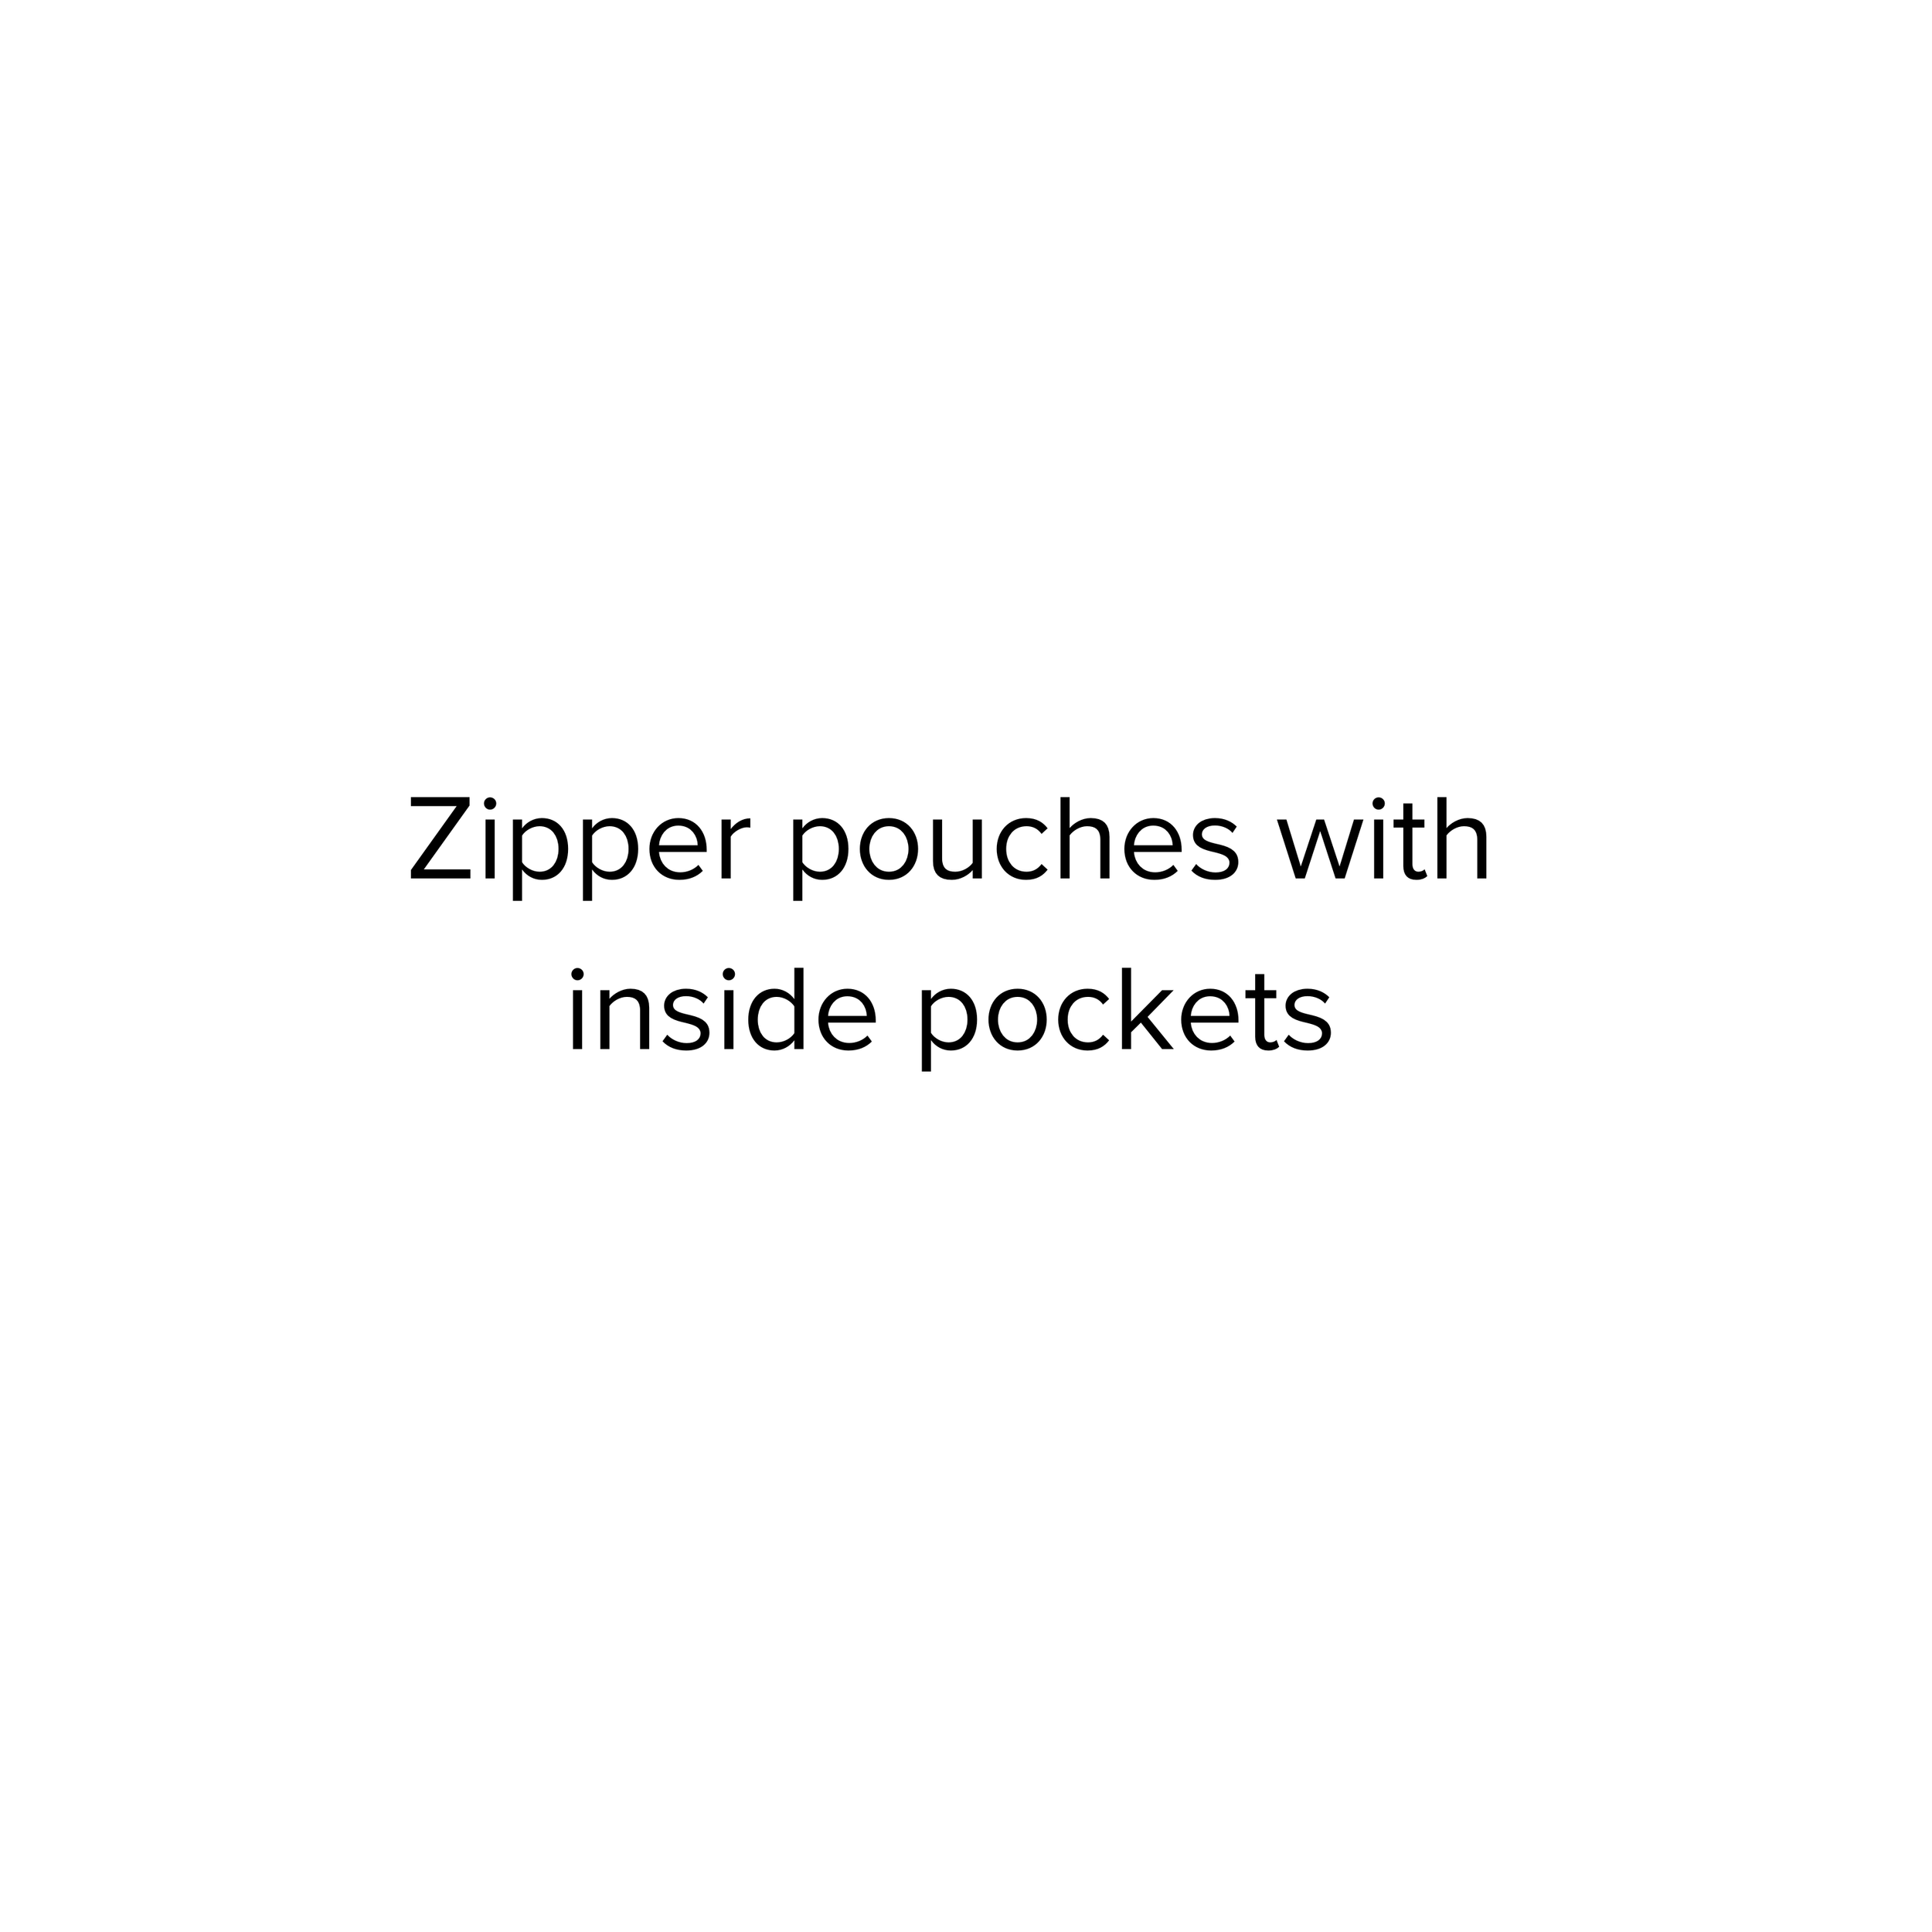  zipper pouches with inside pockets 